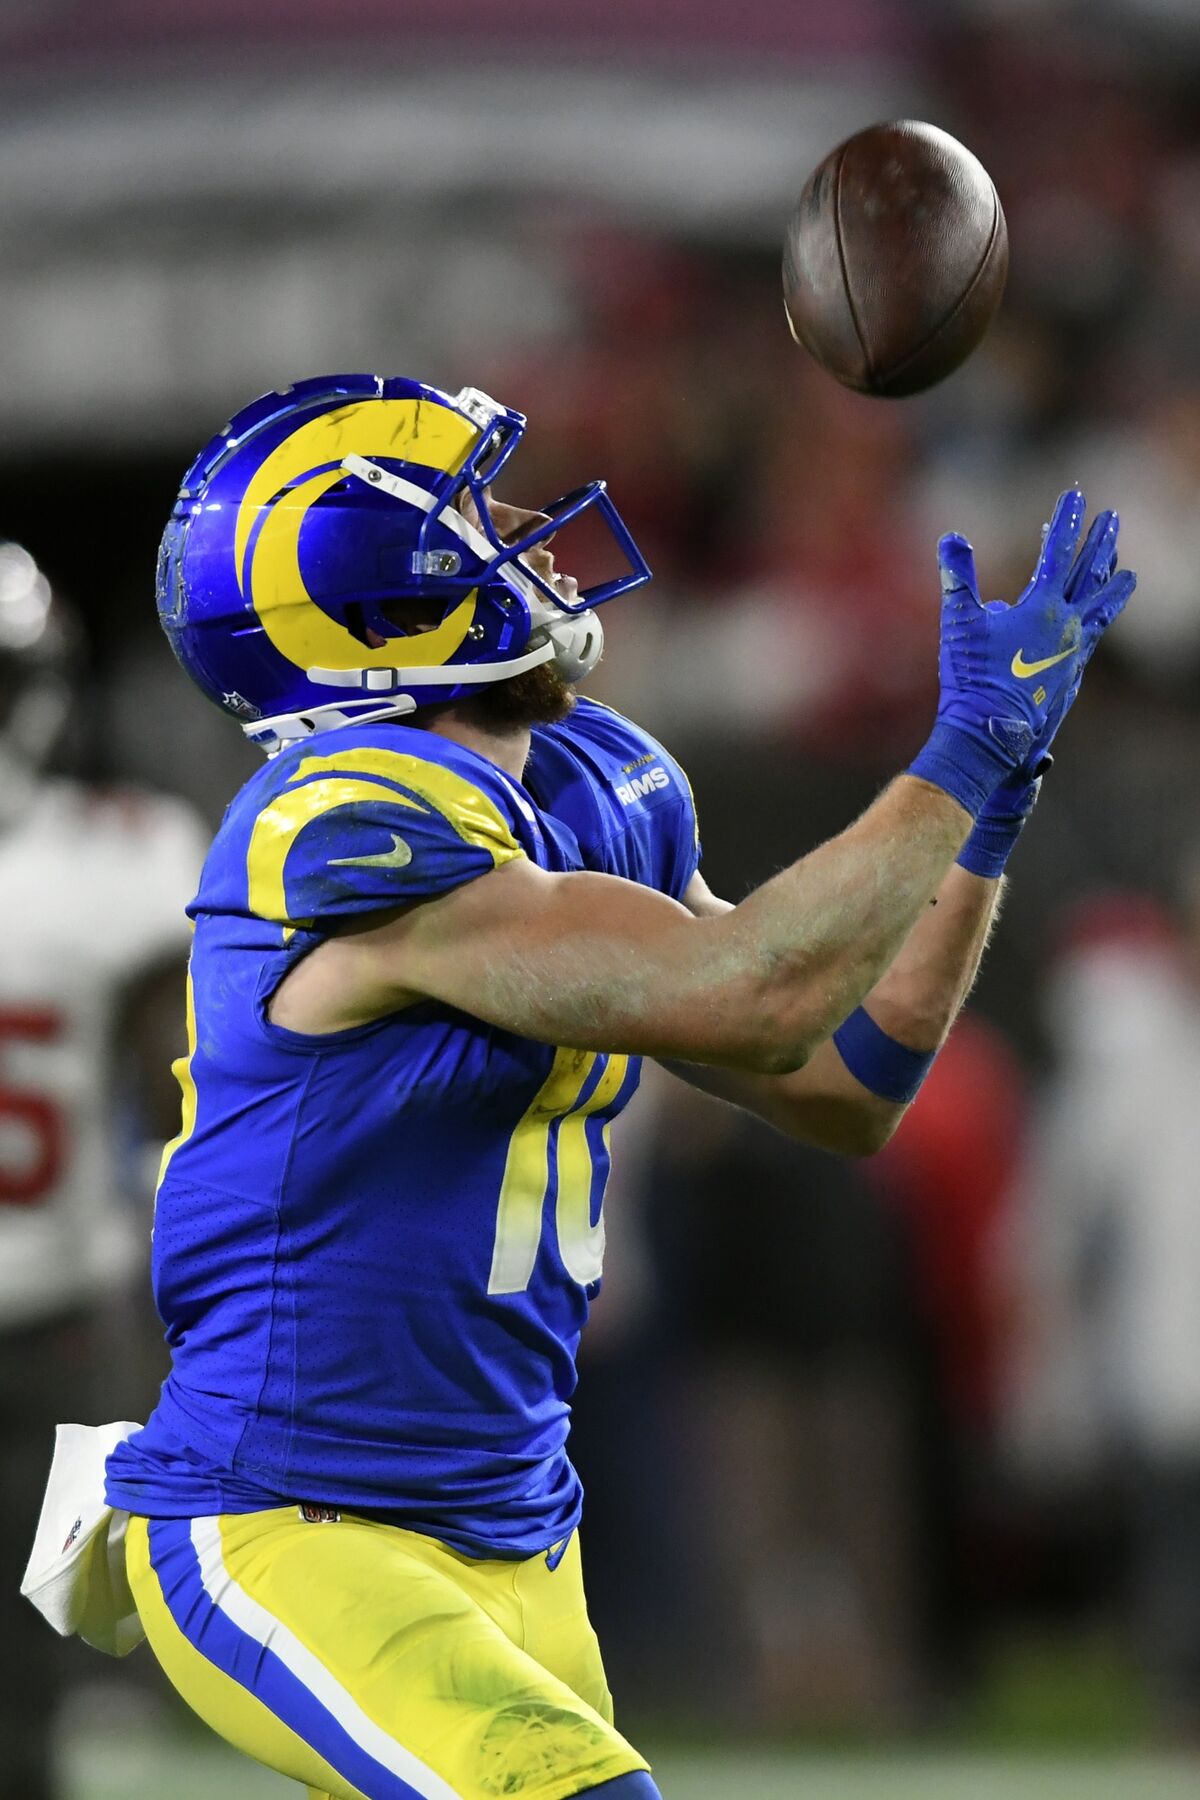 Cooper Kupp Was Everywhere for the Rams, Until He Was Nowhere